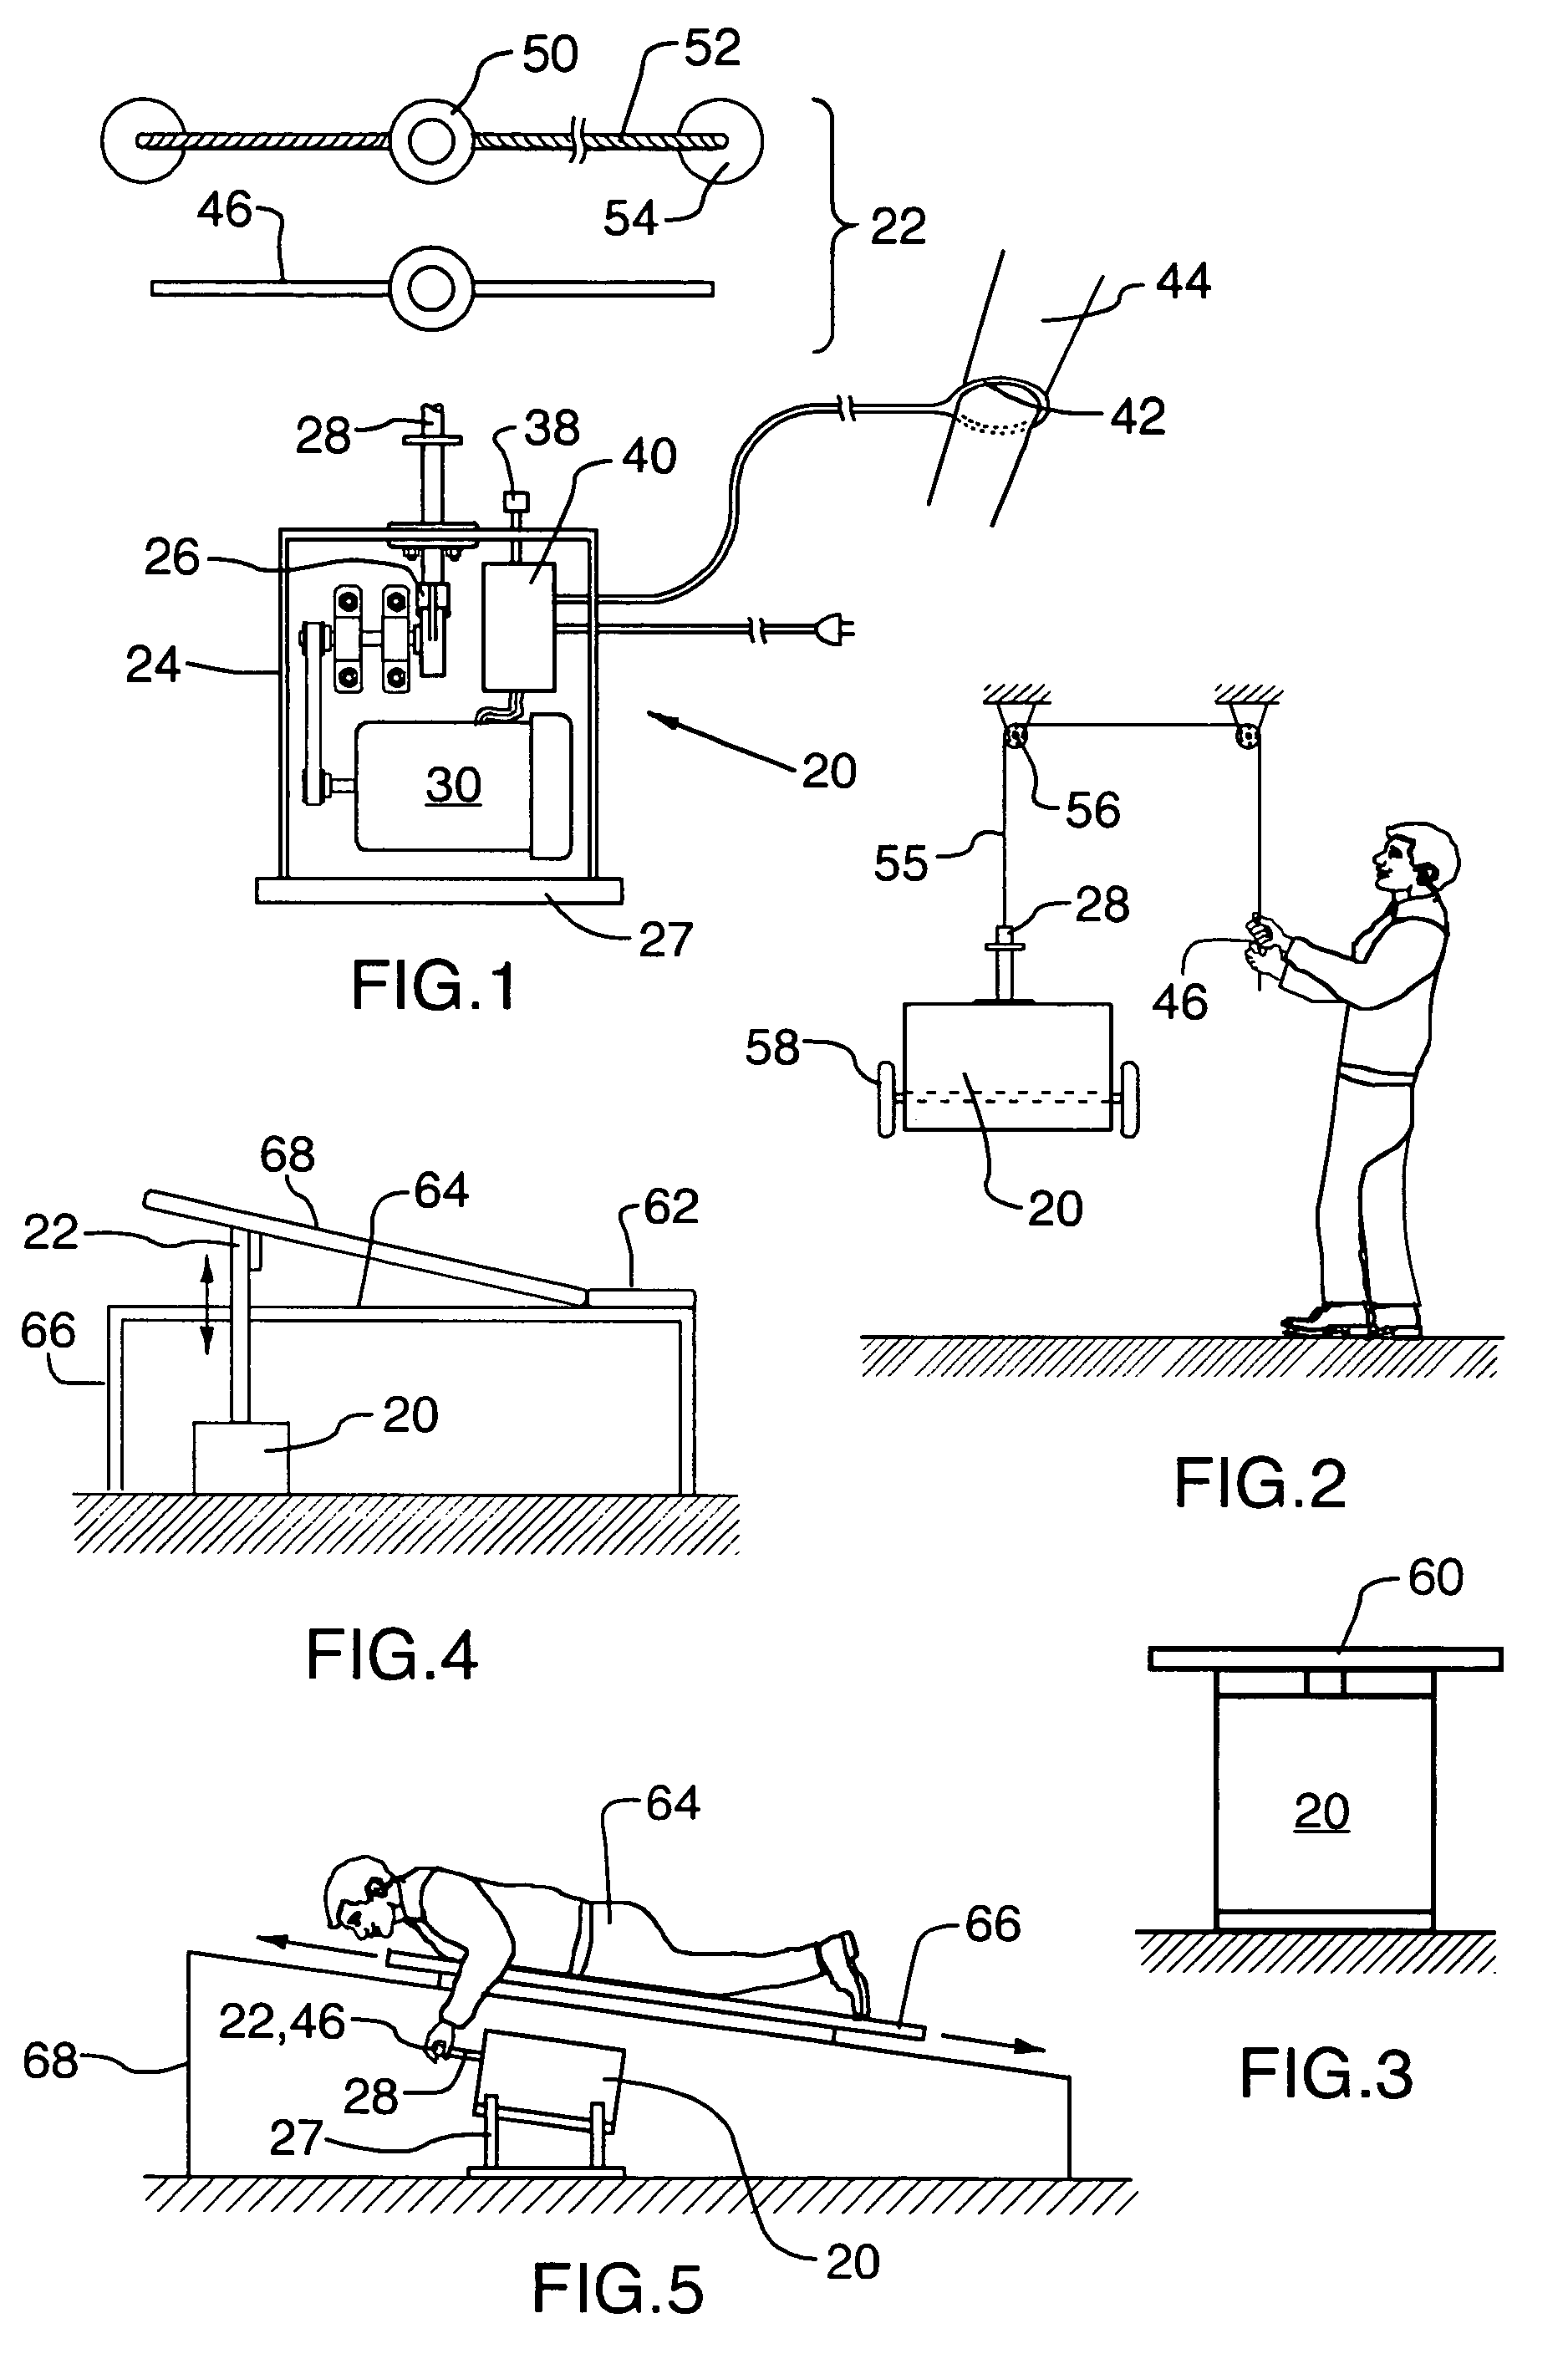 Body vibration generator having attachments for exercises to target body regions